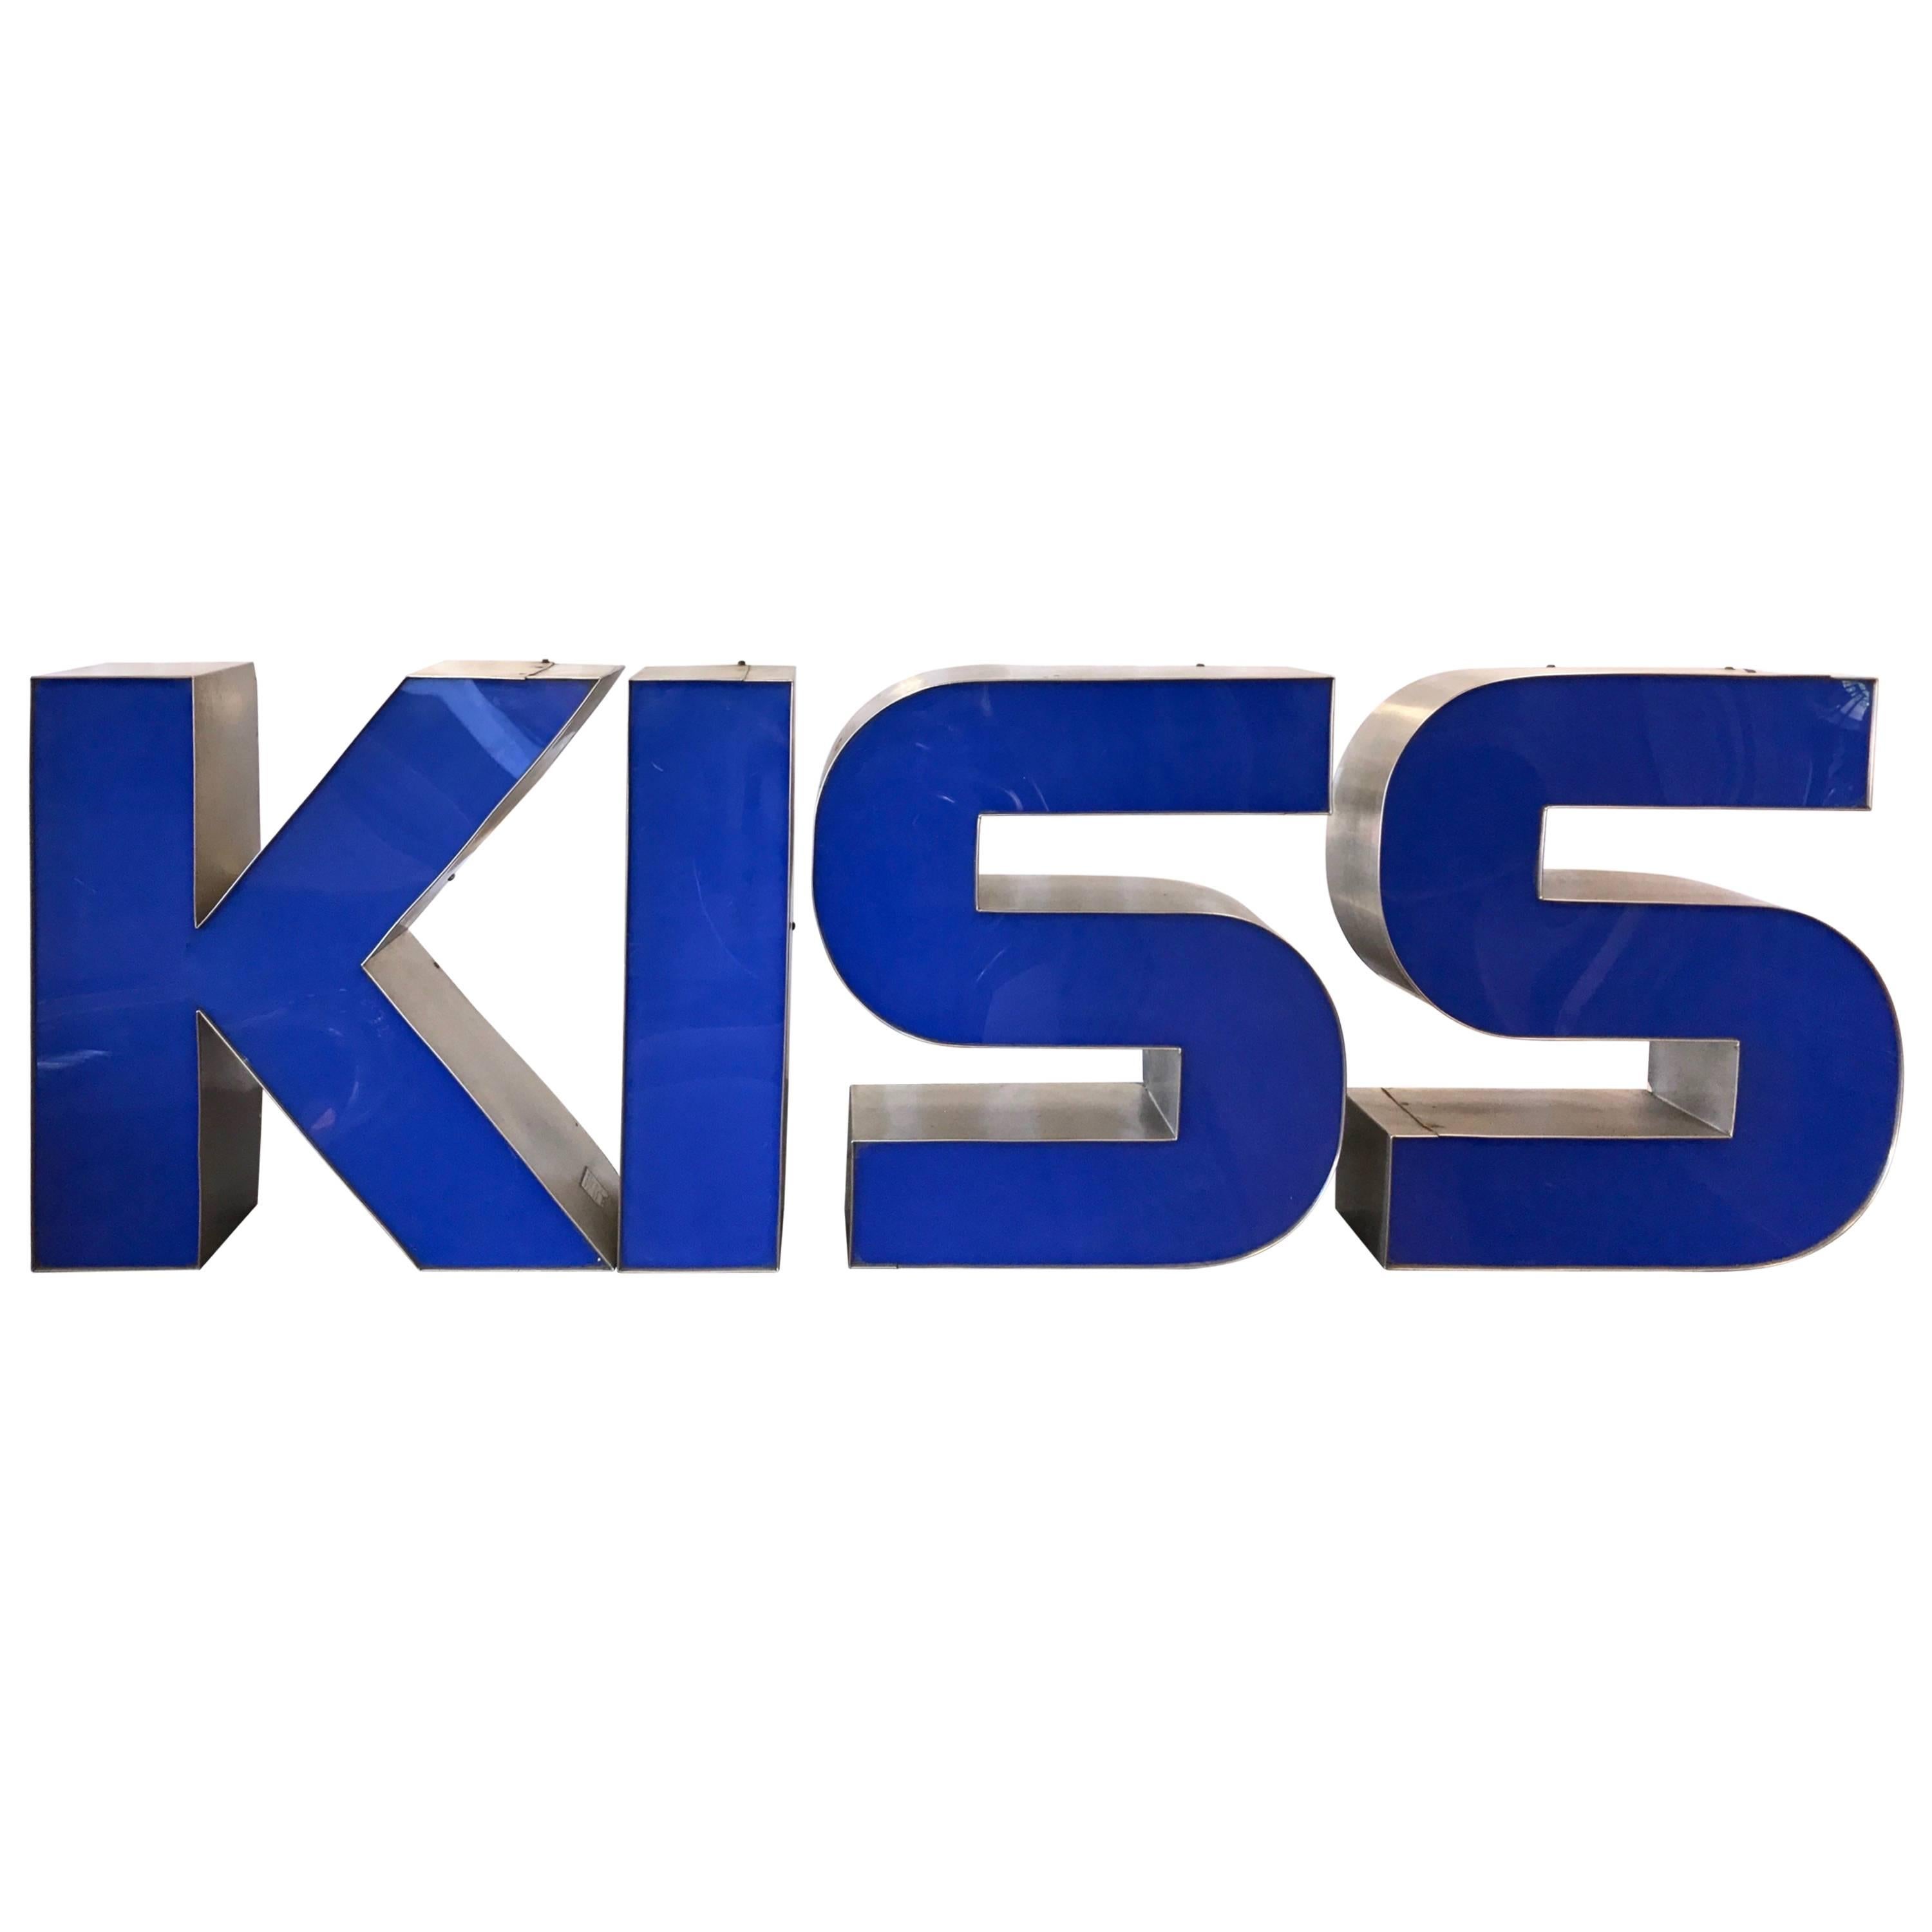 Four-Piece Set of Extra Large Vintage Signage Letters Spelling “KISS”